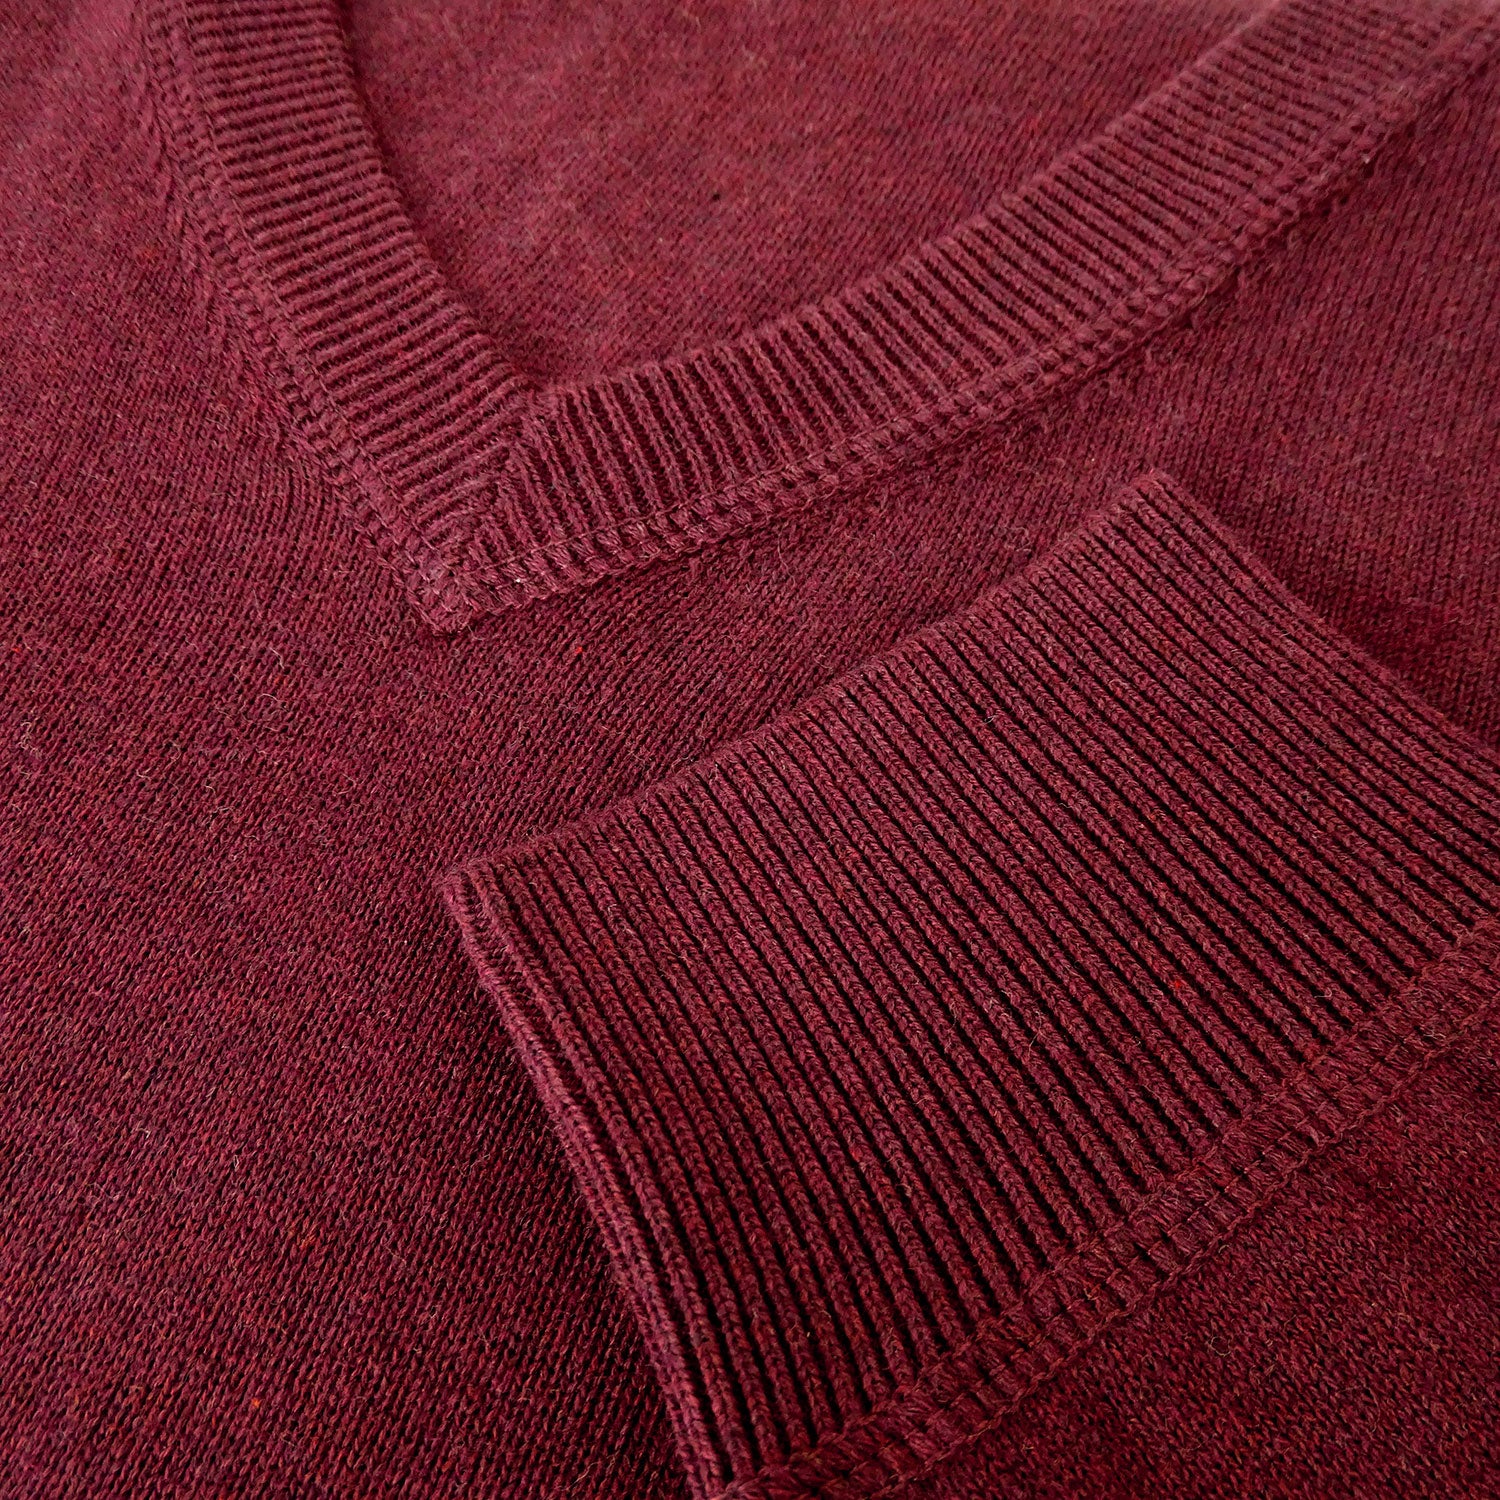 Burgundy Stirling V Neck Cotton Sweater by Hoggs of Fife 